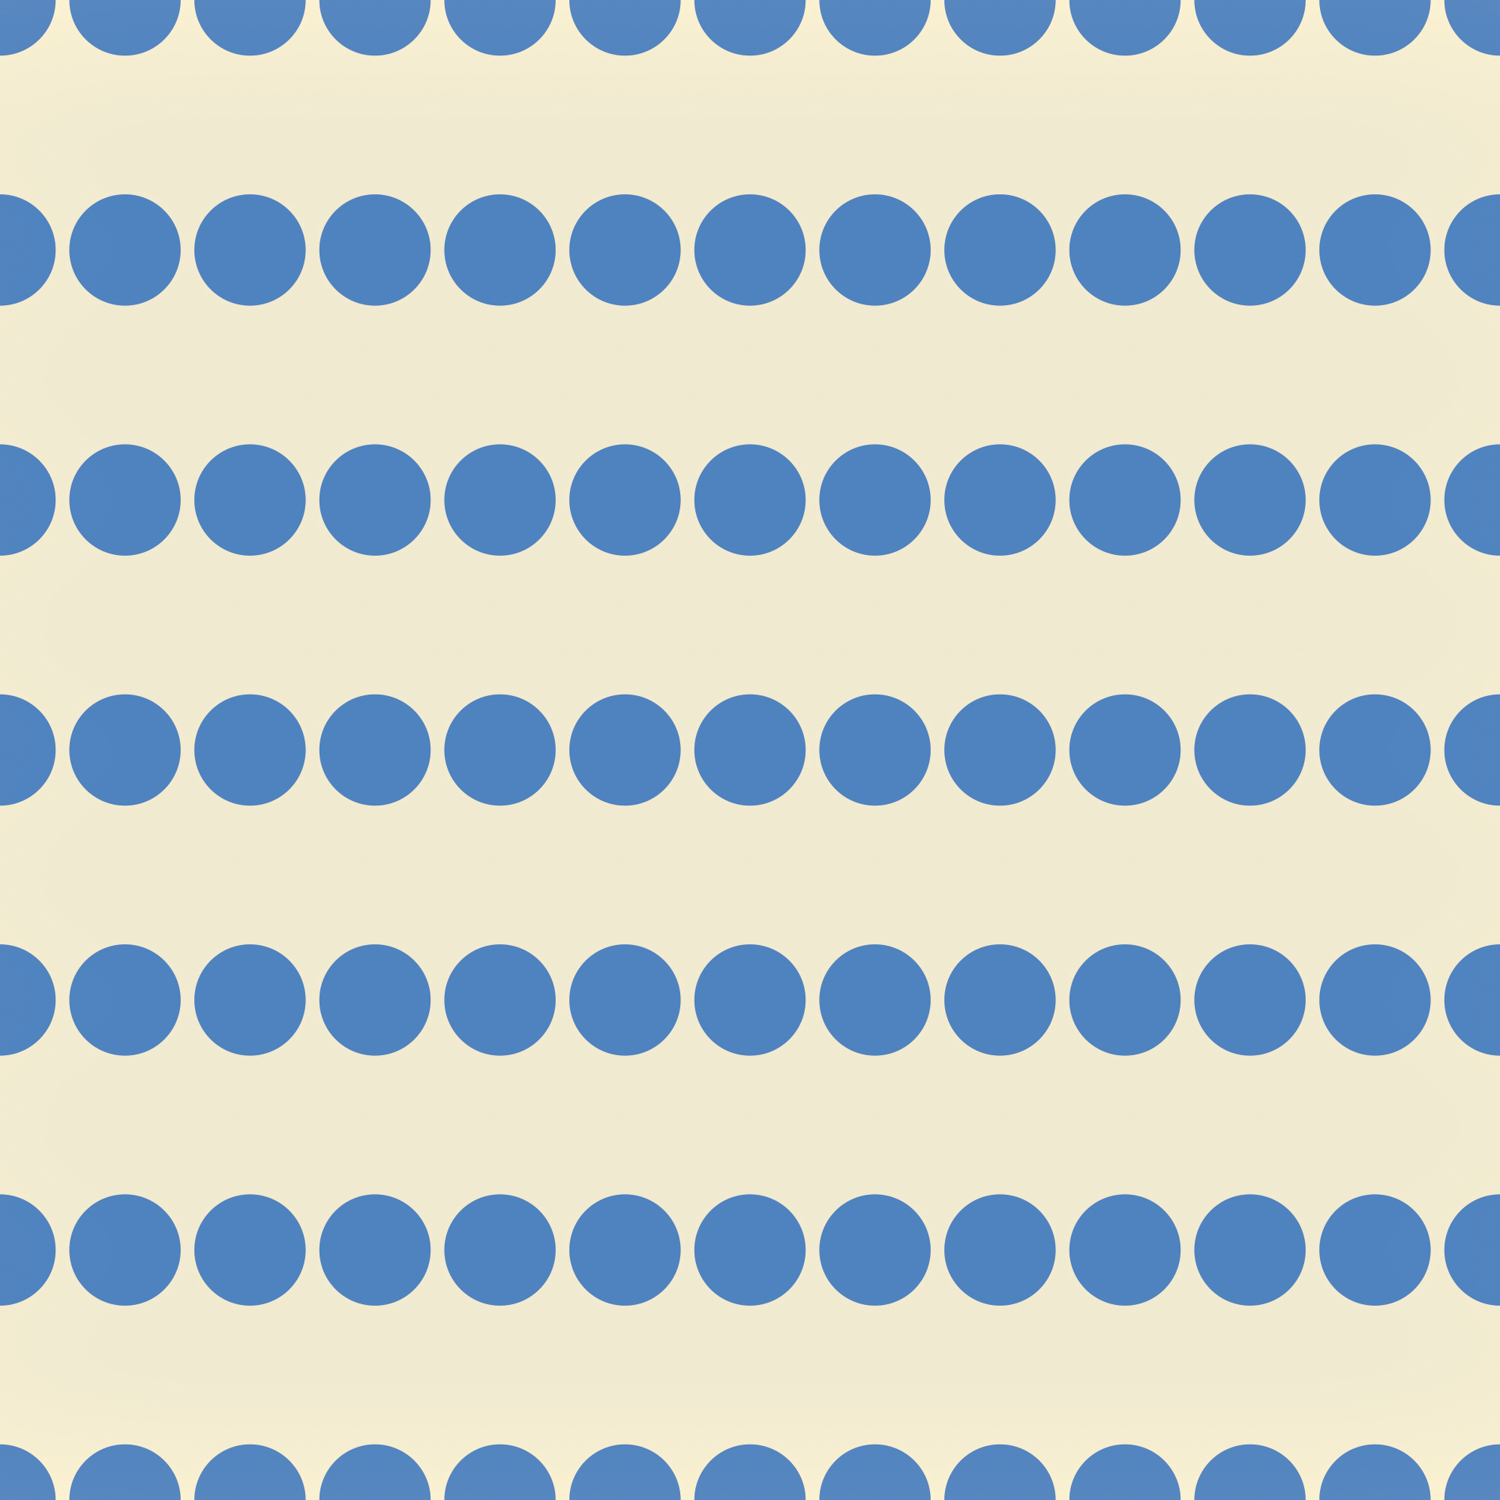 Sample of wallpaper with lines of small blue circles against a cream-colored background